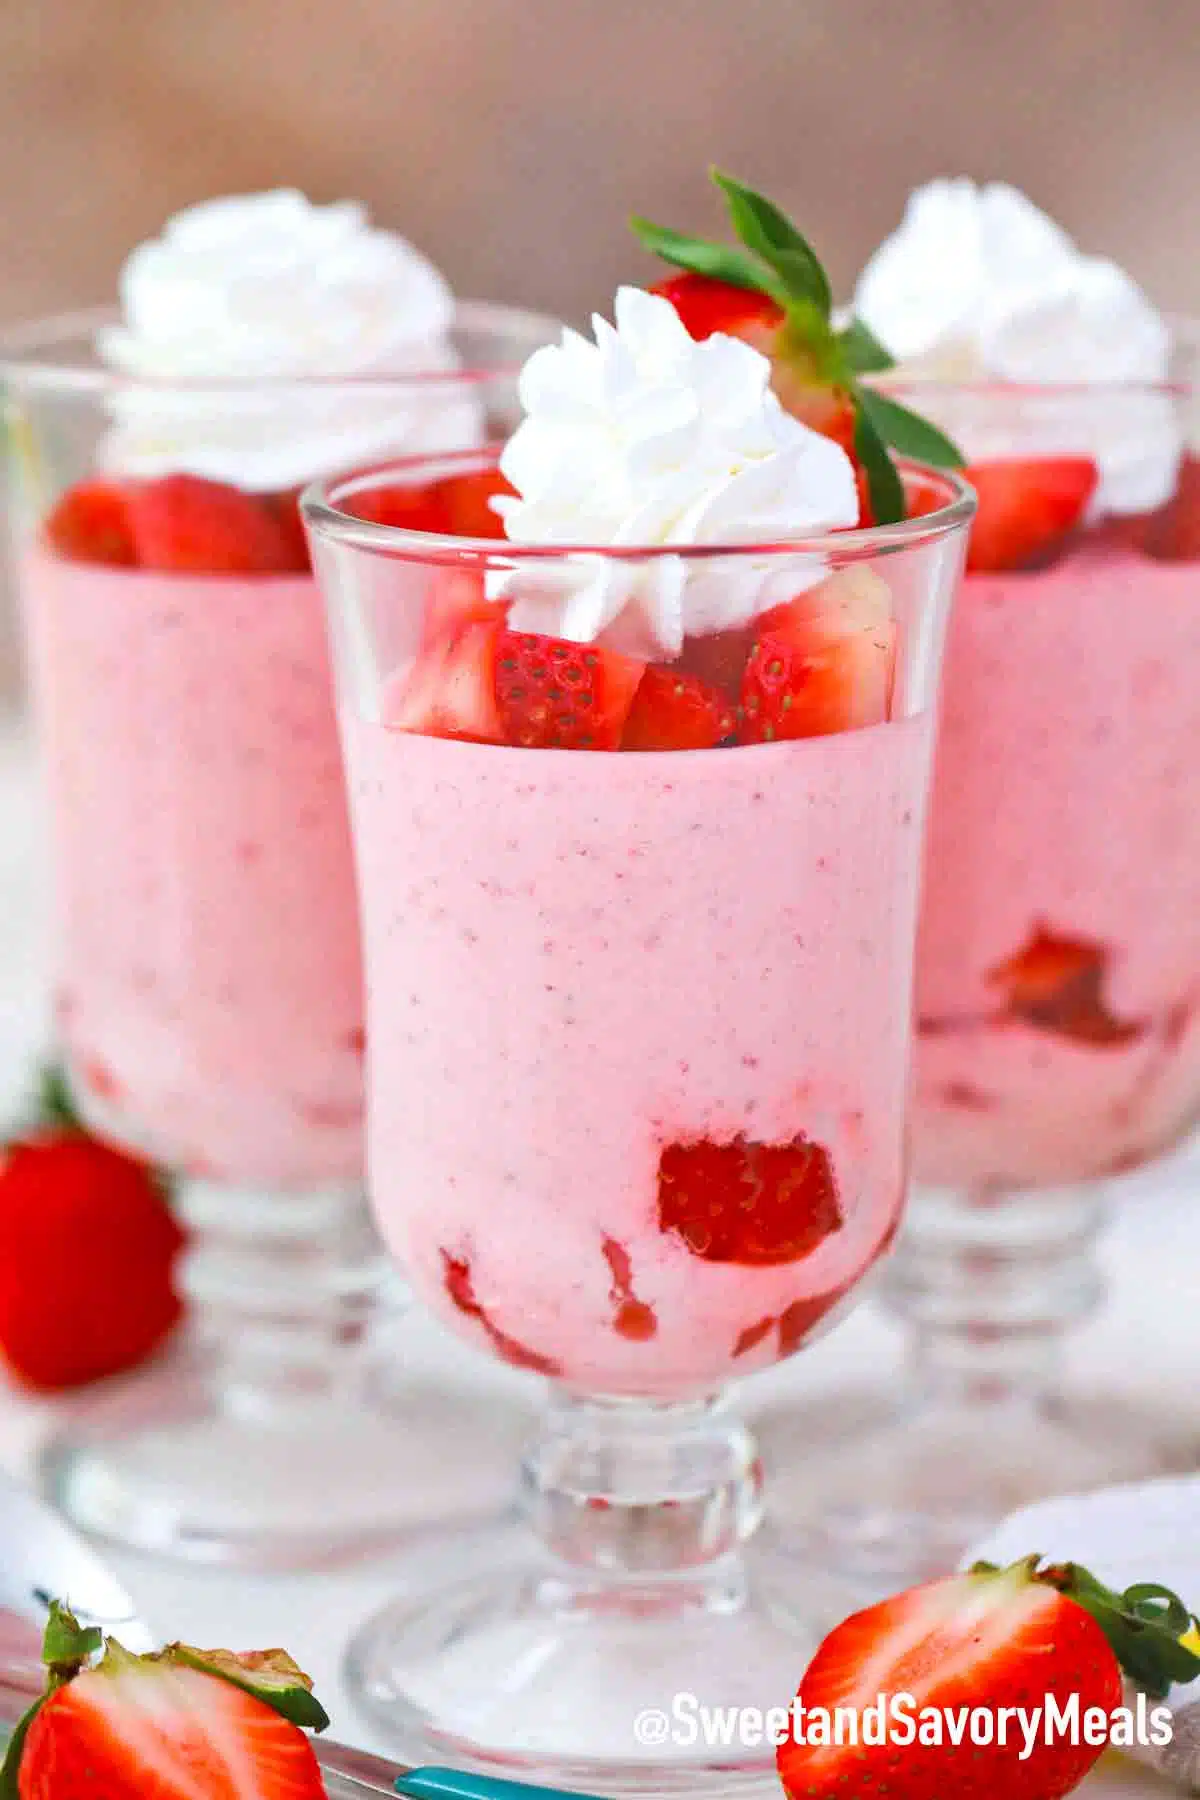 Strawberry Mousse Recipe [Video] - Sweet and Savory Meals